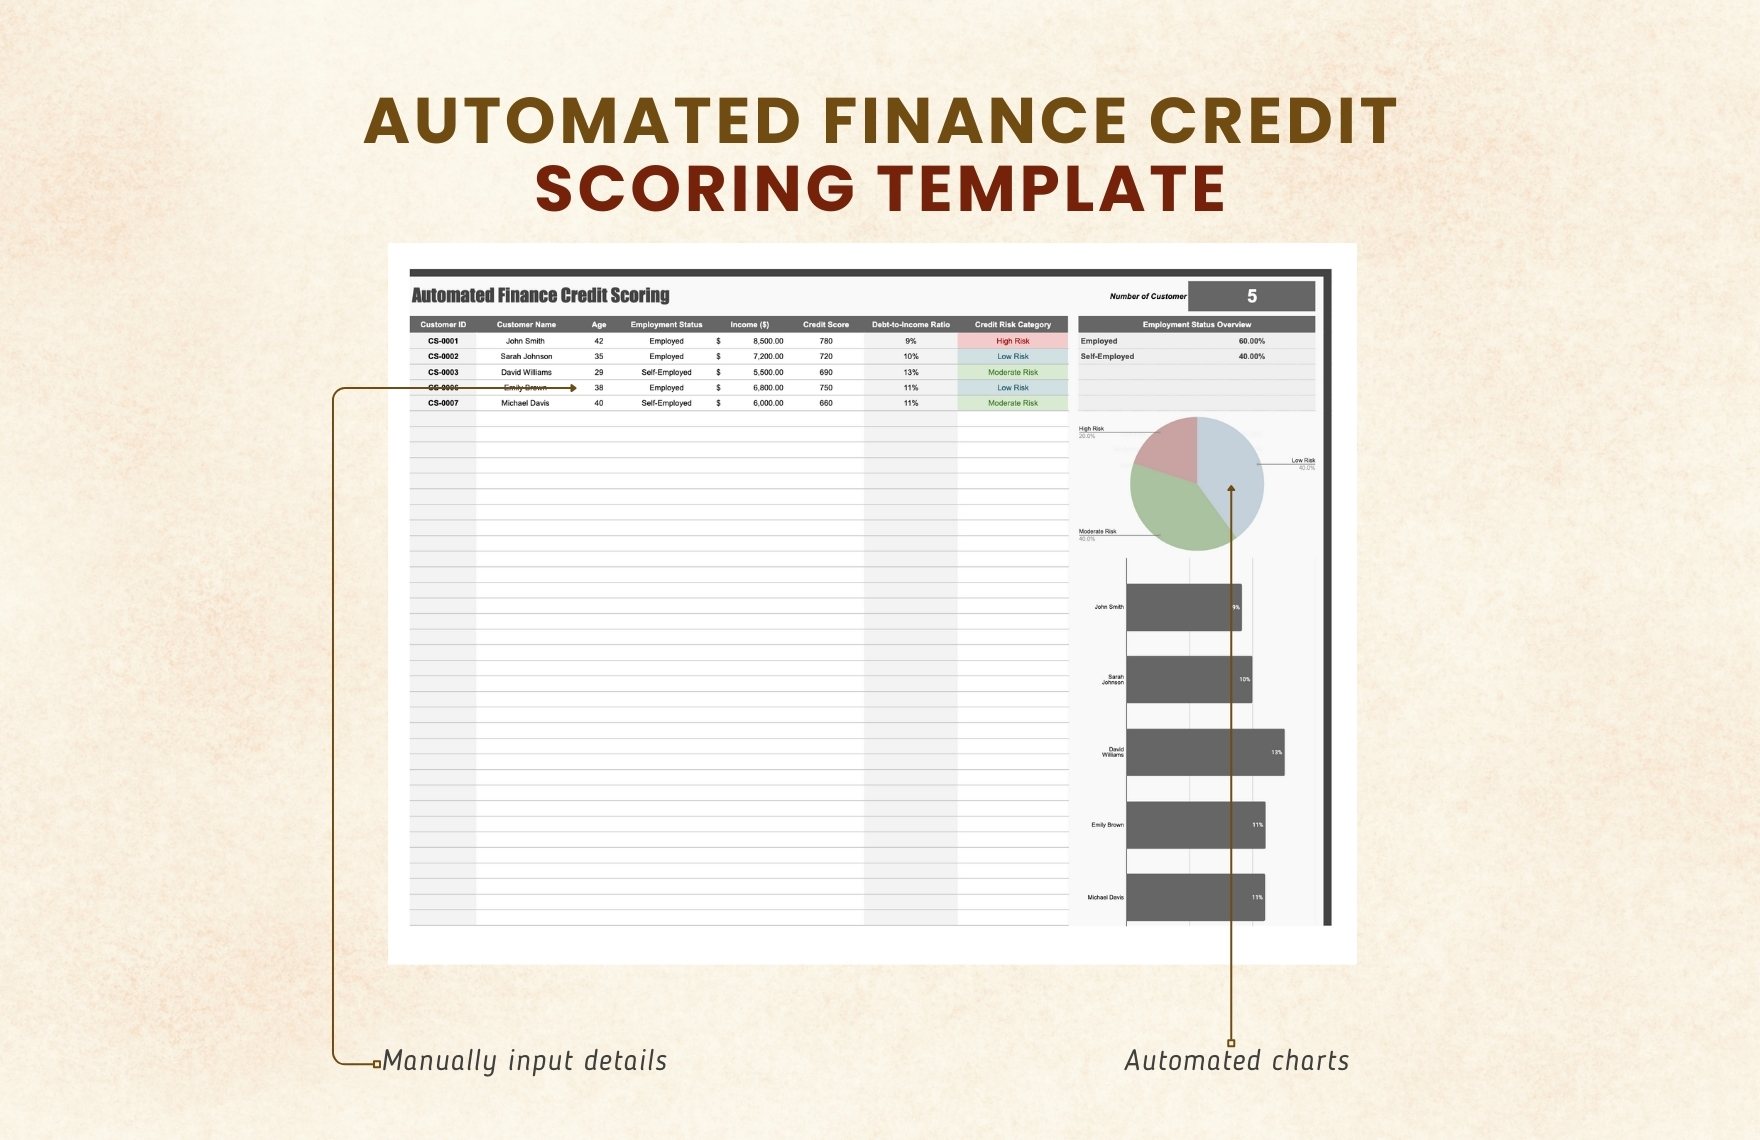 Automated Finance Credit Scoring Template